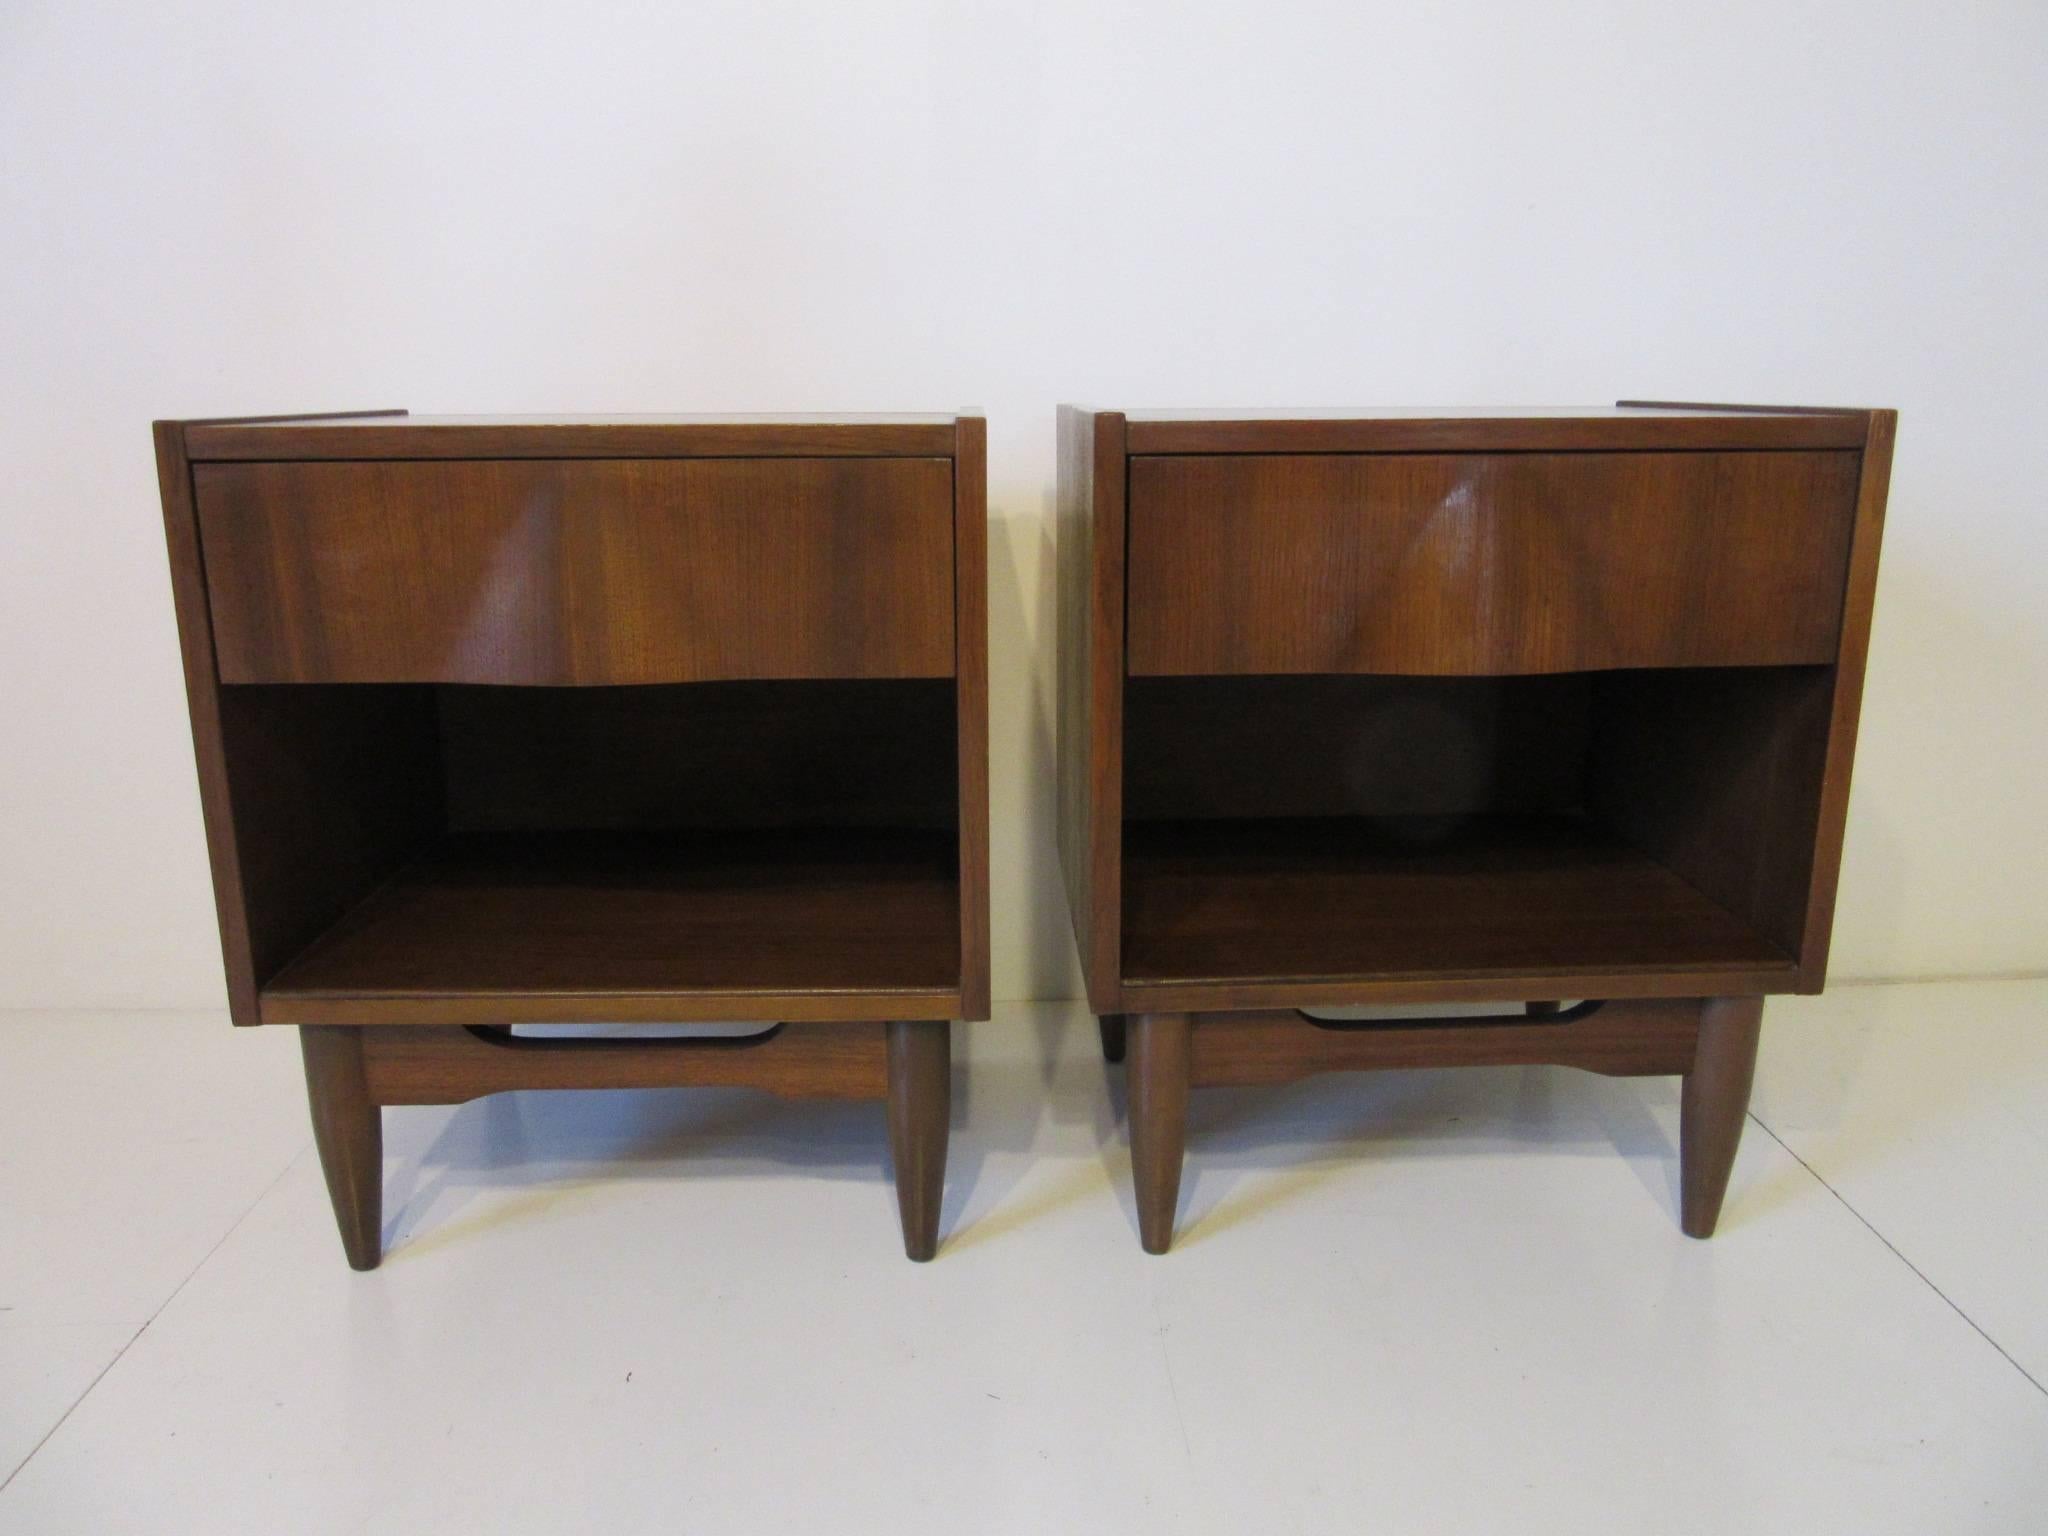 A pair of well grained walnut nightstands with single drawers, storage and the pull area has a sculptural front design making them quite attractive.